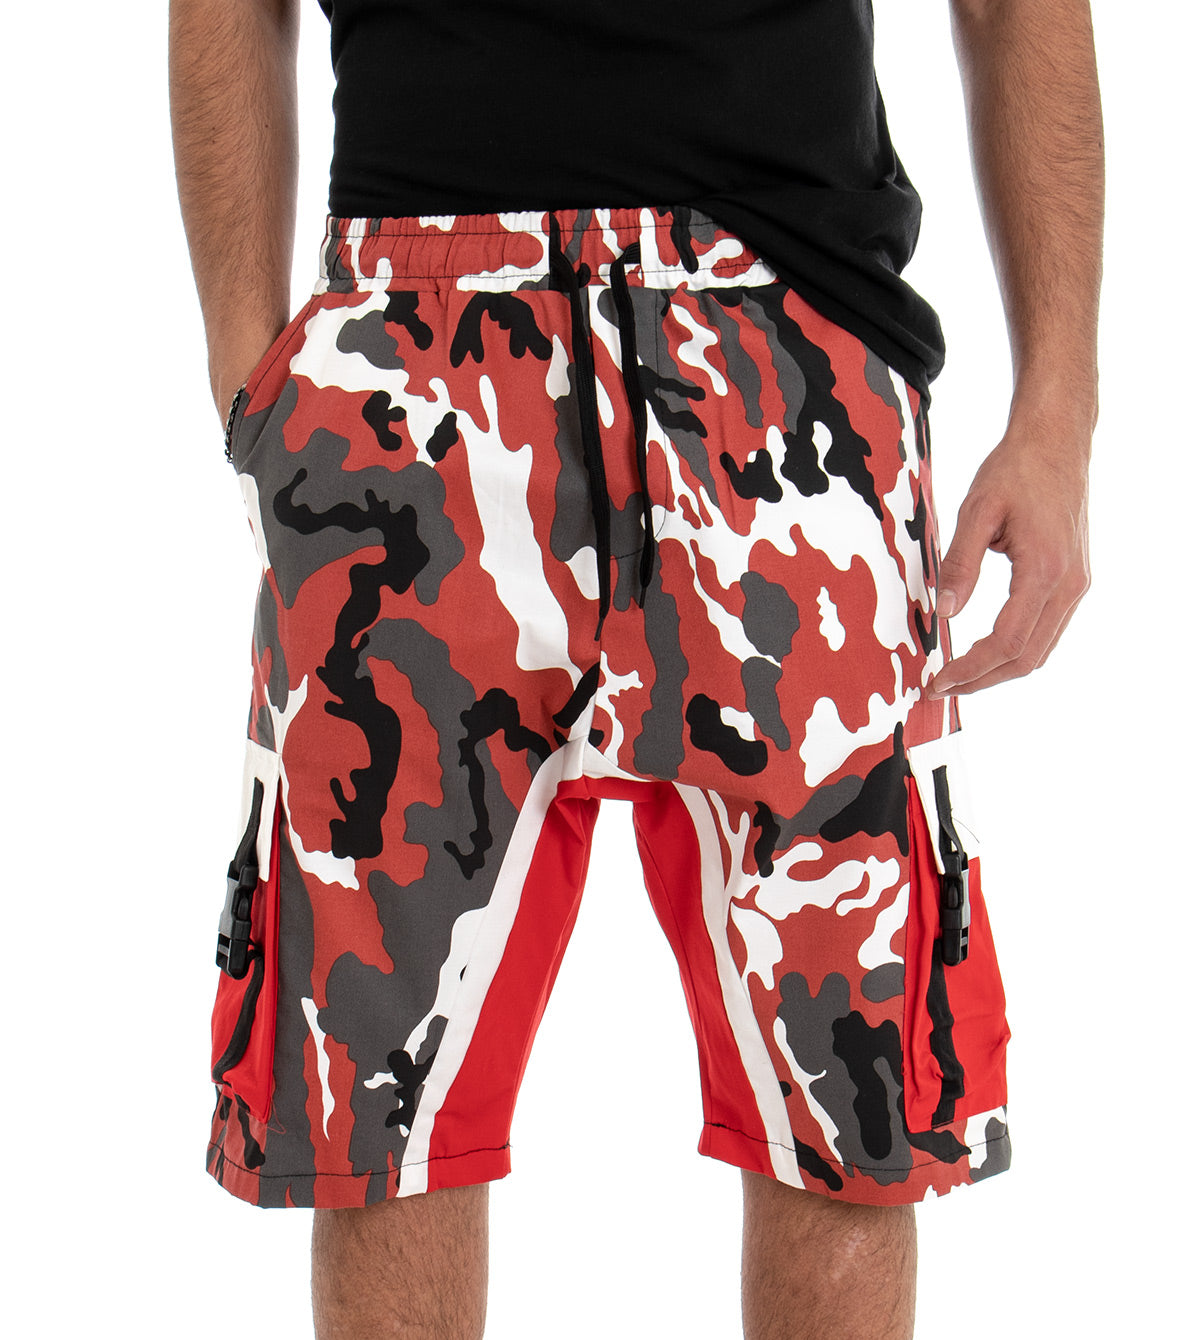 Bermuda Shorts Men's Camouflage Pattern Red Elastic GIOSAL-PC1381A